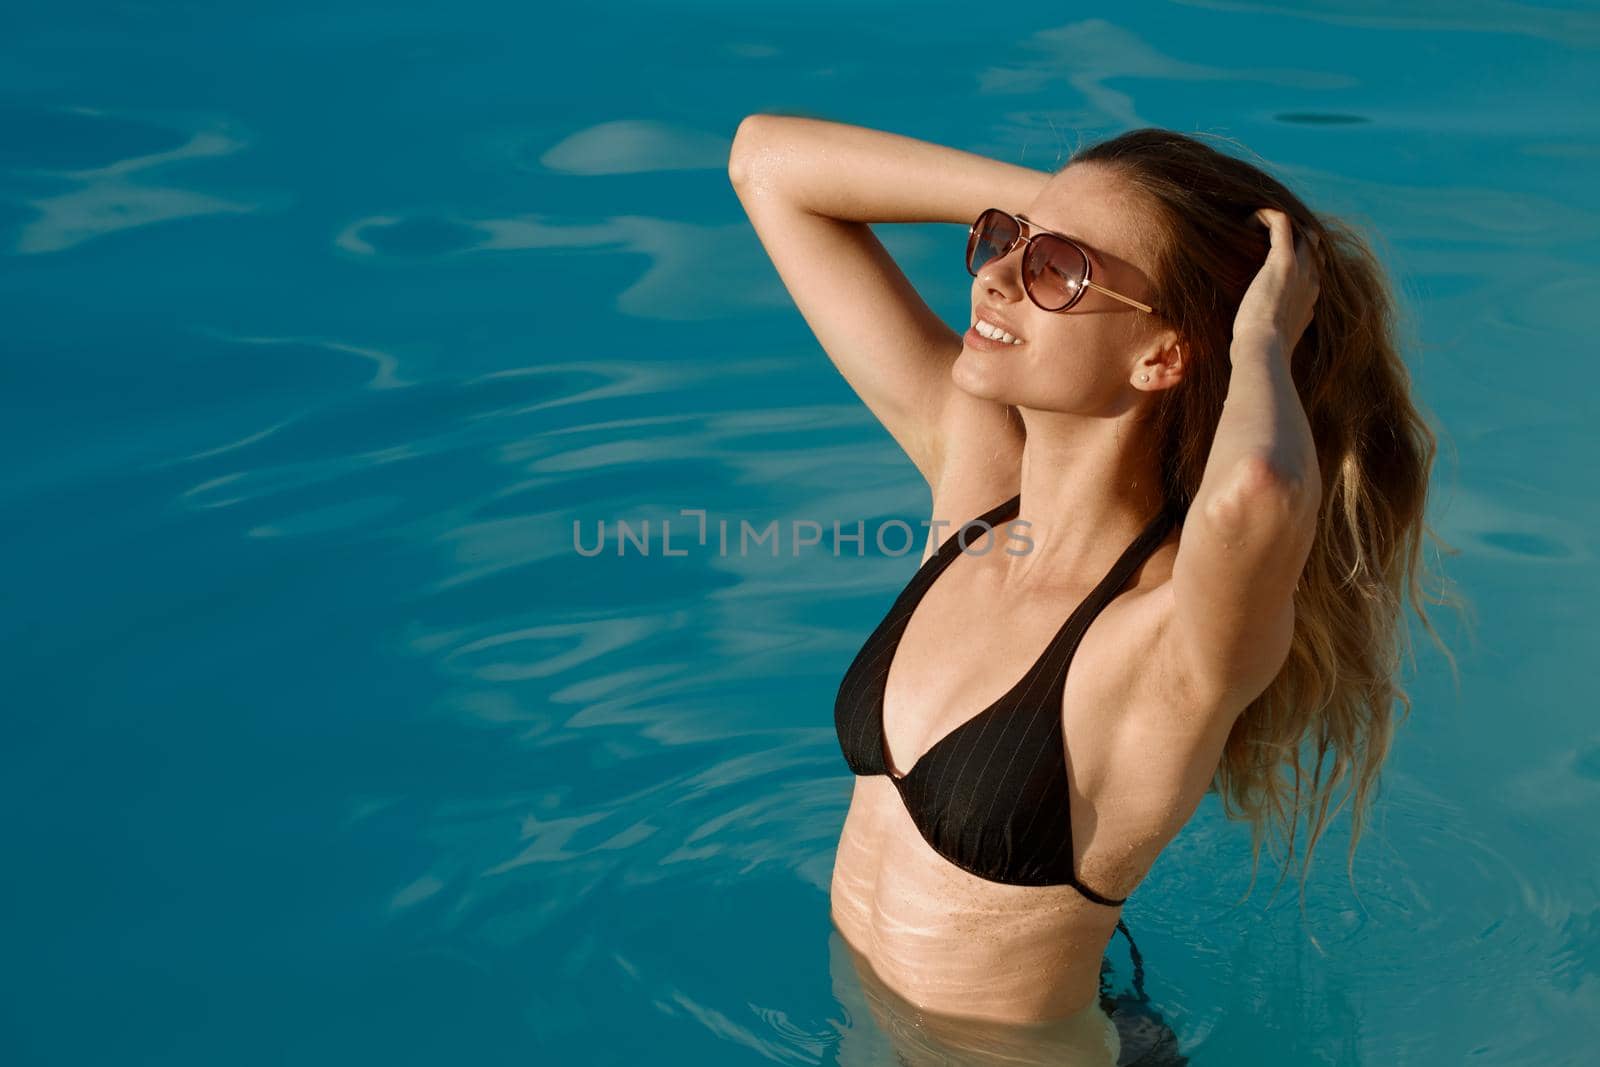 Gorgeous young woman enjoying a swim at the pool, copy space. Beautiful happy woman smiling, touching her hair sensually while relaxing at the swimming pool. Hotel, resort, vcation concept